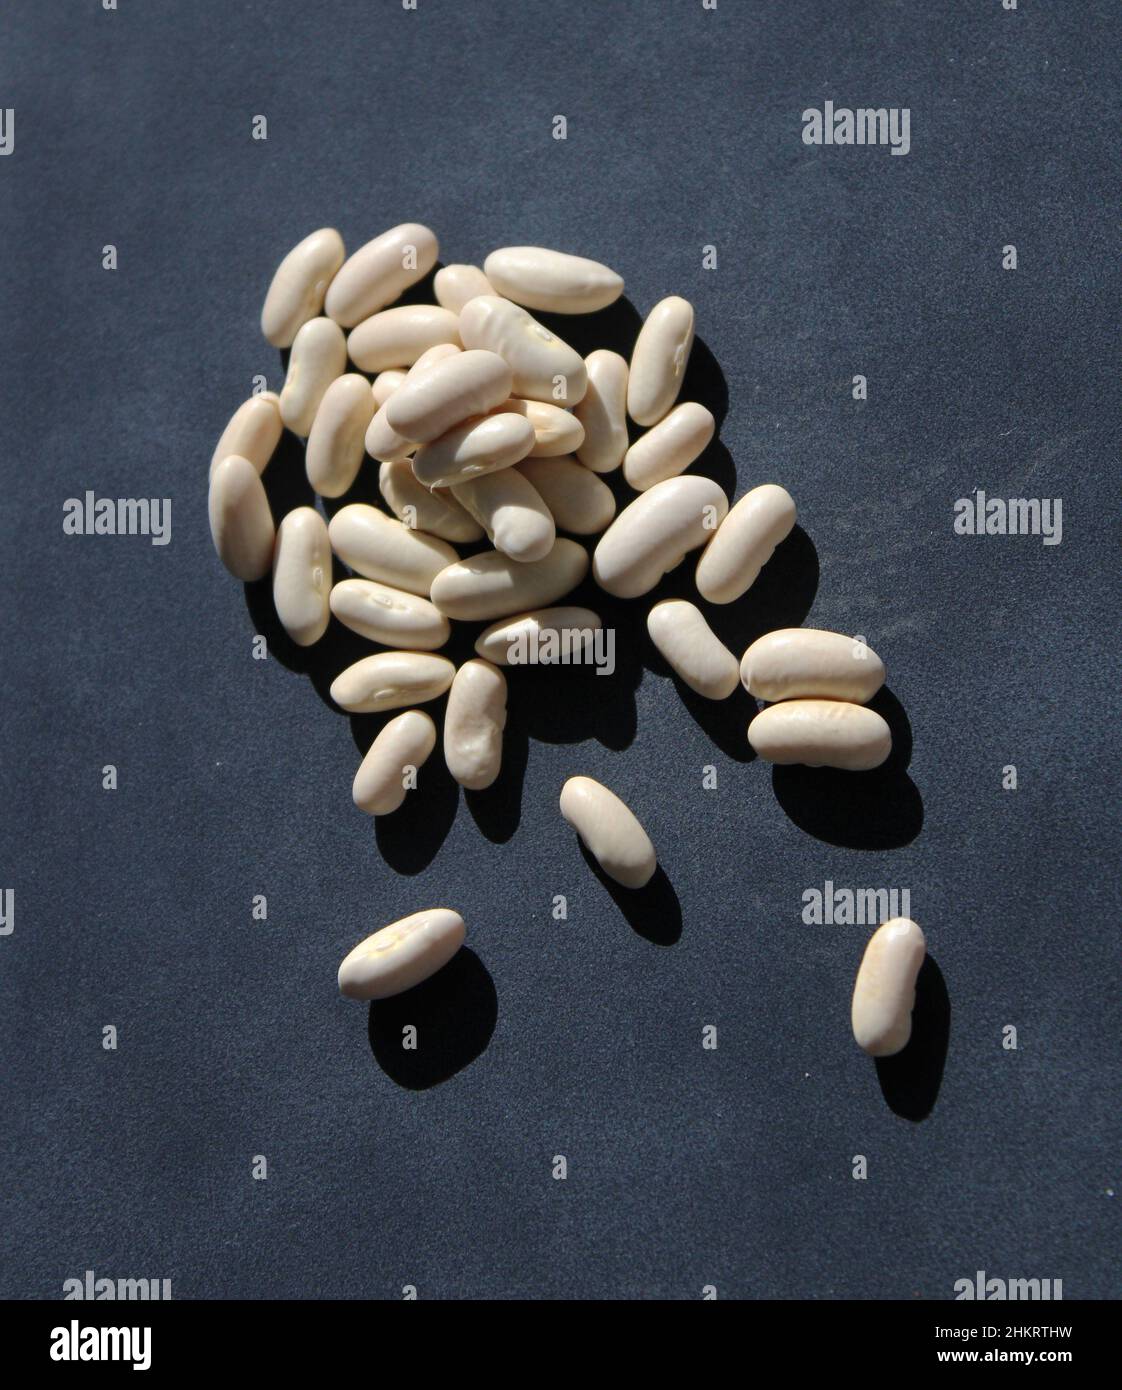 A Pile of Gold Bush Beans on a Gray Background Stock Photo